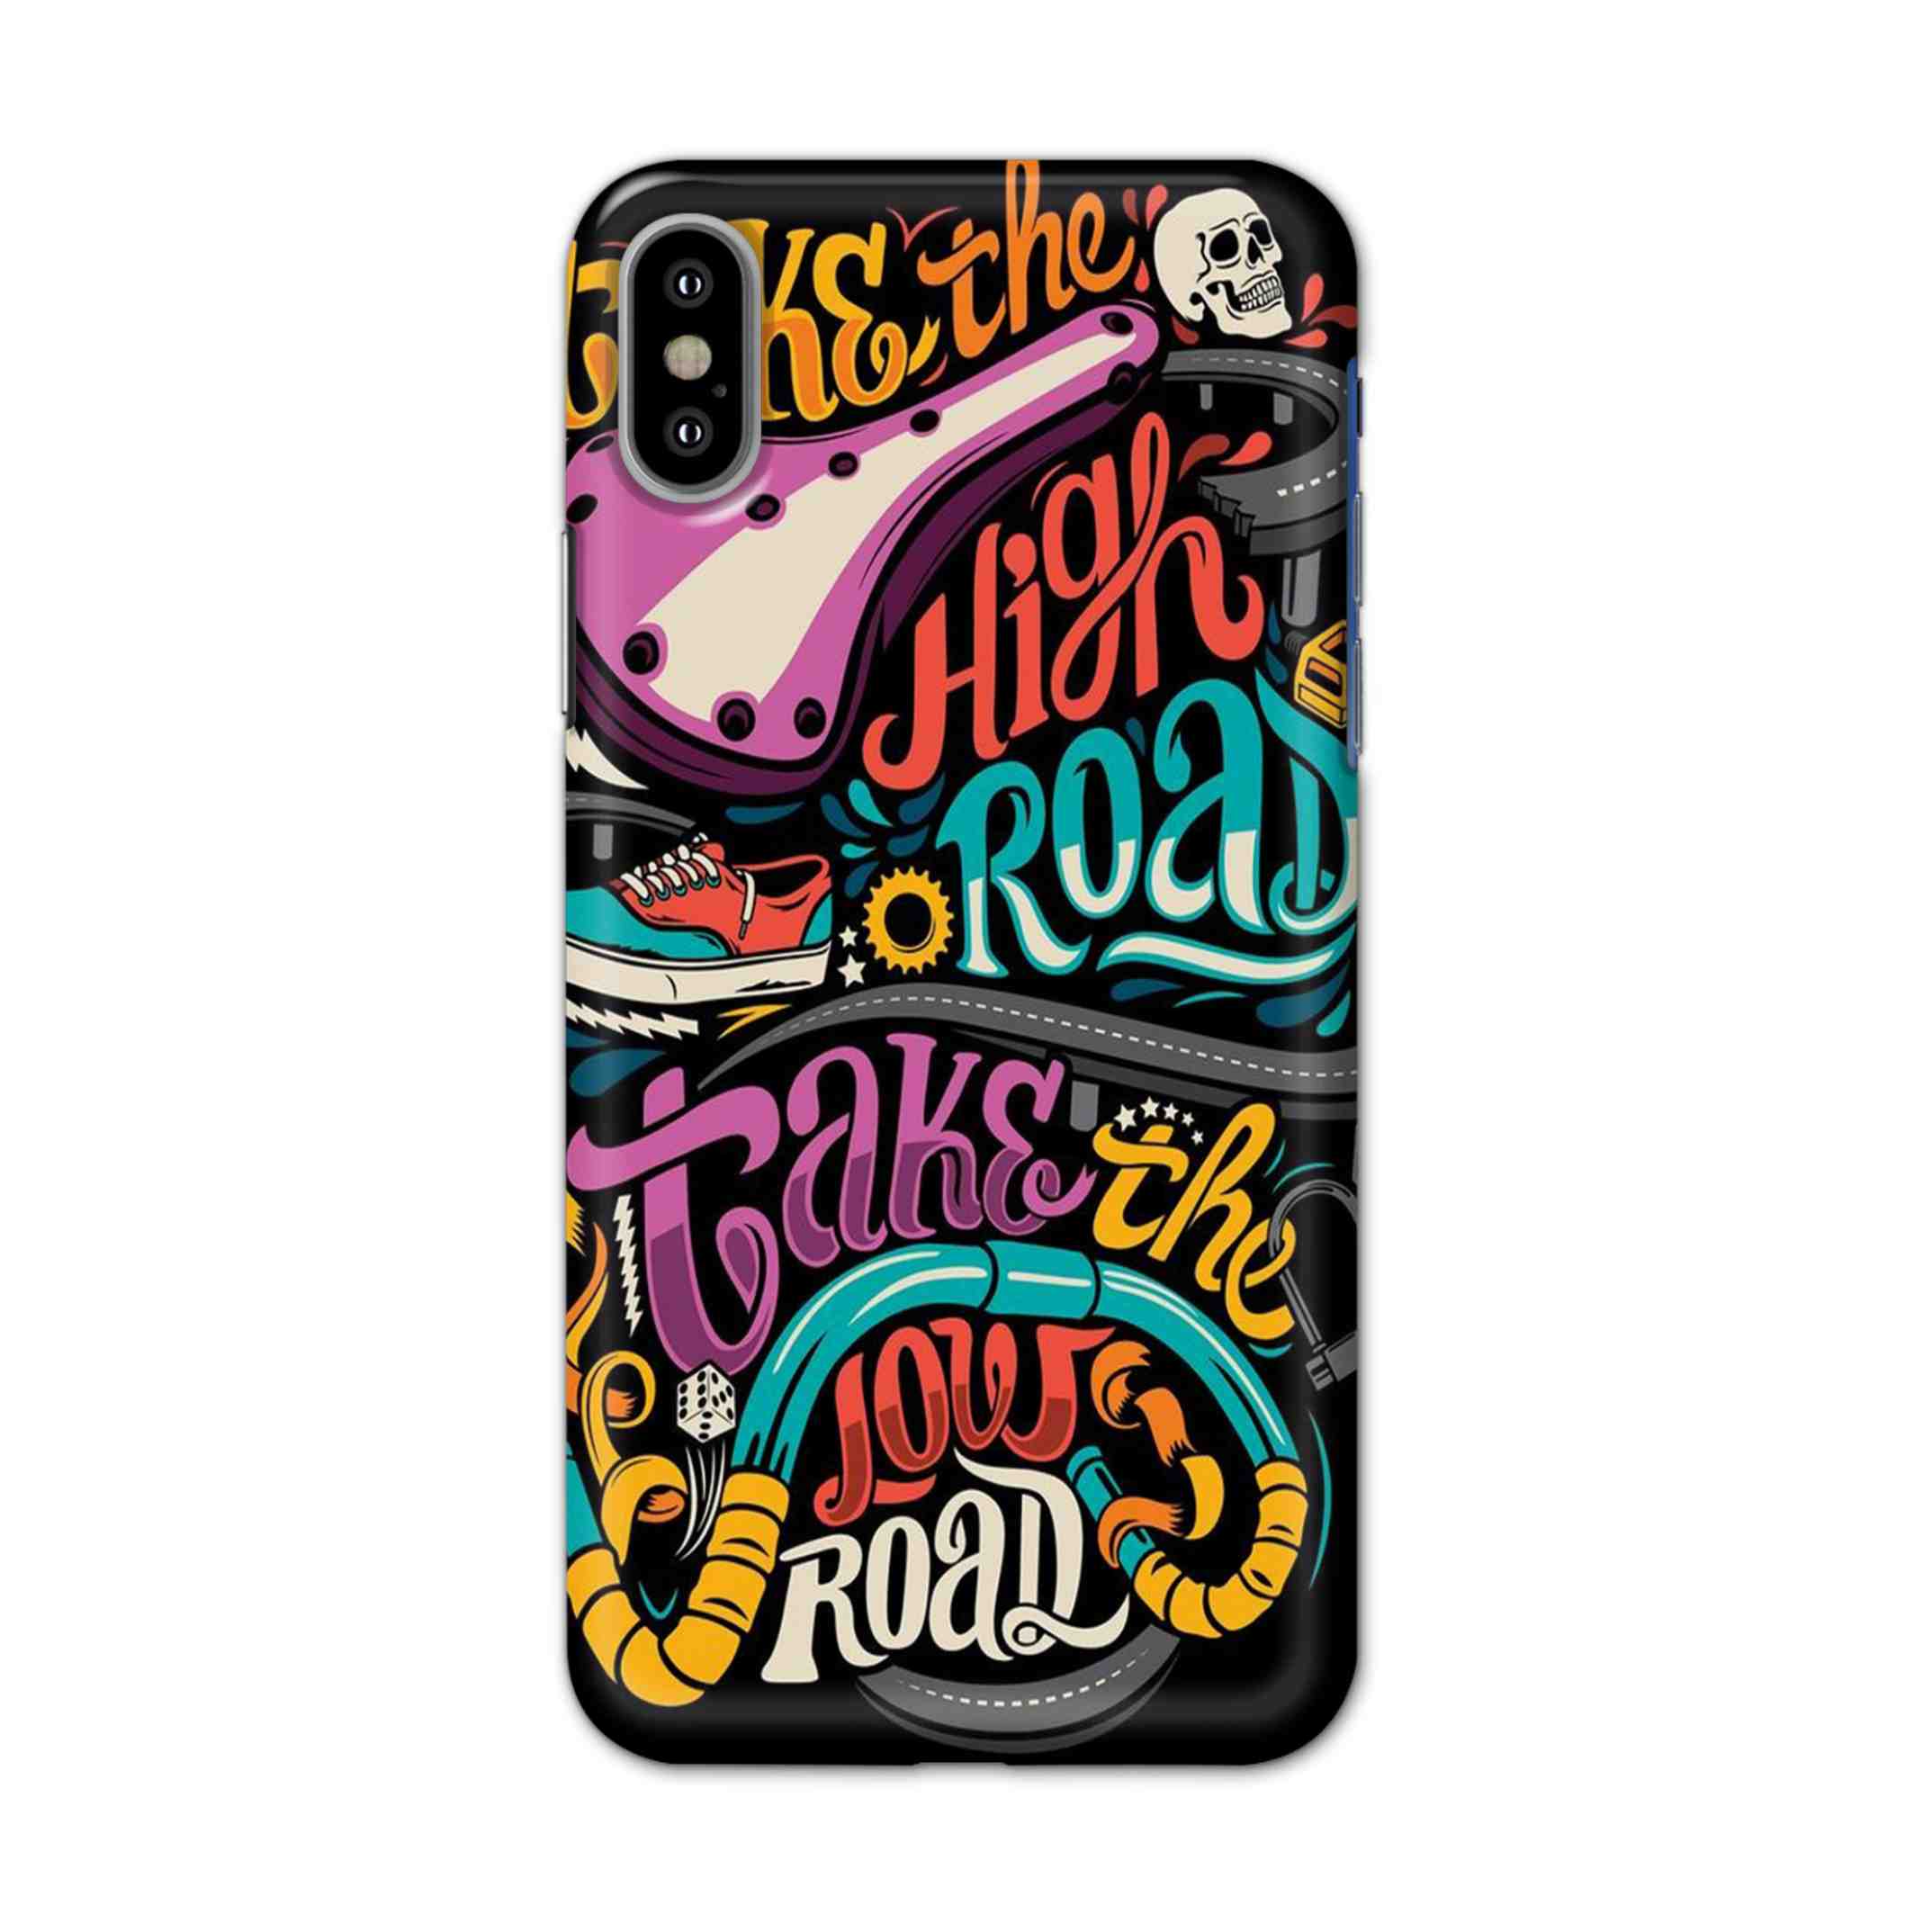 Buy Take The High Road Hard Back Mobile Phone Case/Cover For iPhone X Online